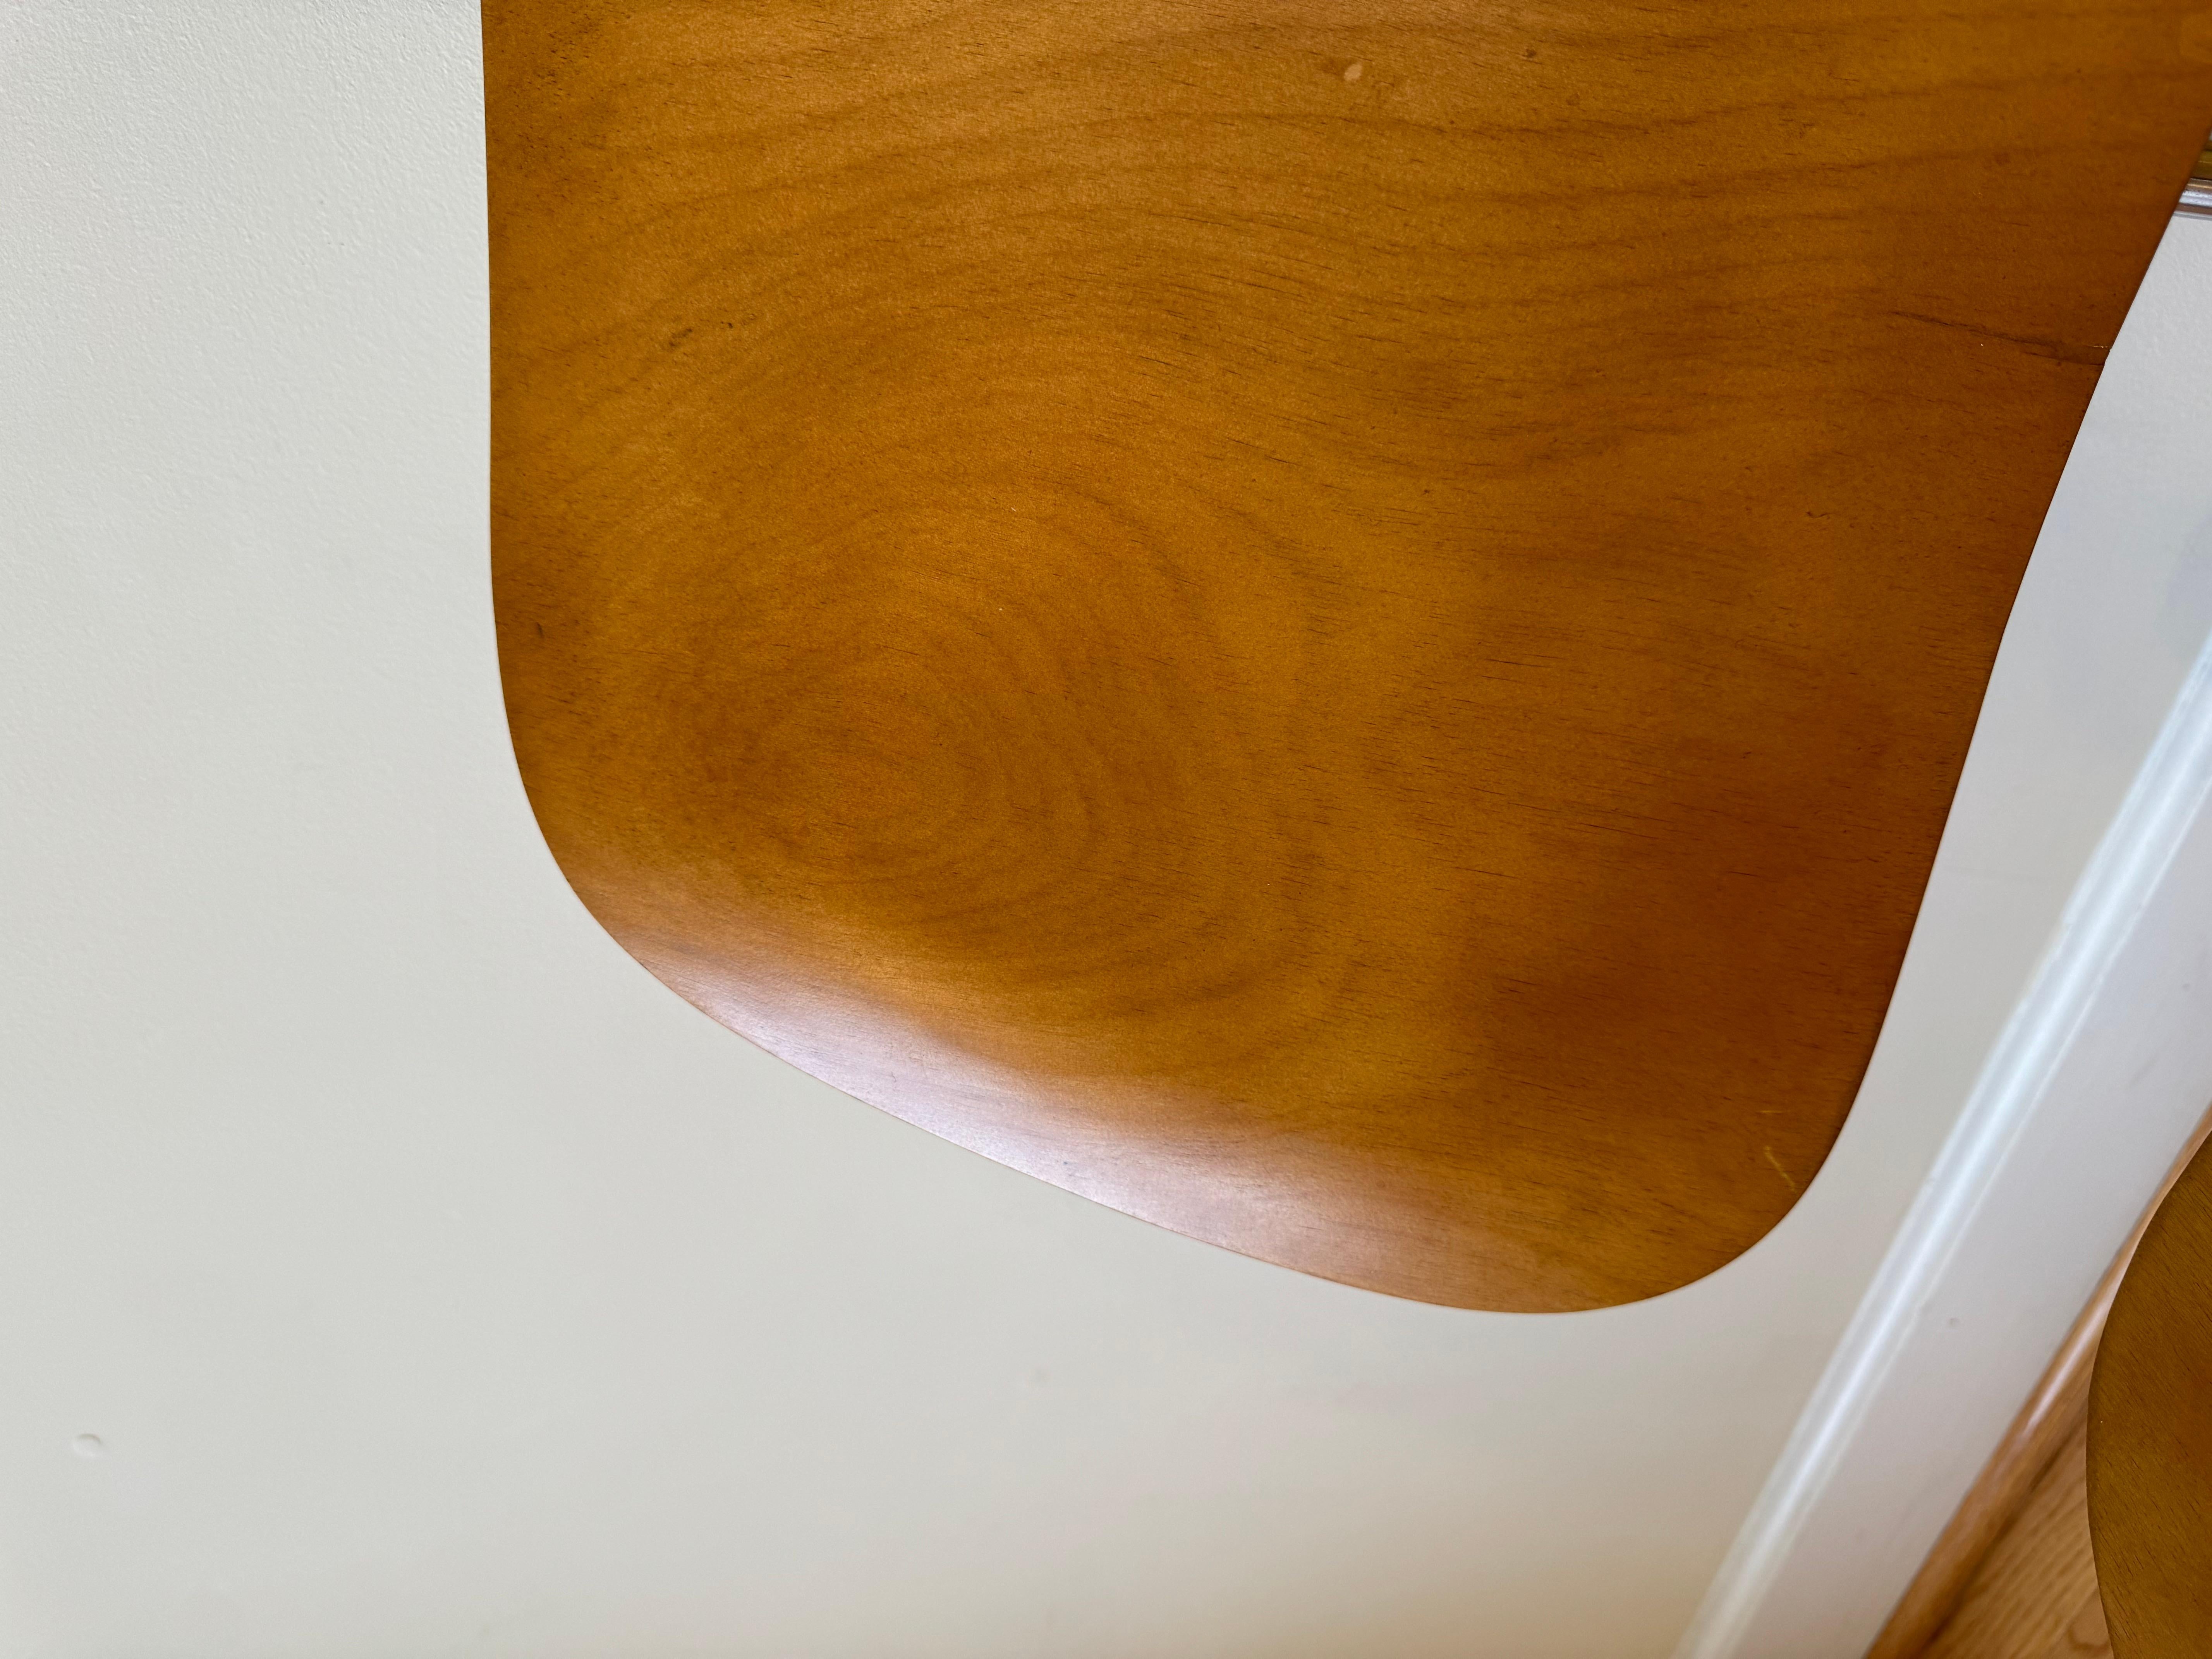 Eames Molded Plywood Lounge Chair Metal Base (LCM), Circa 1950s In Good Condition For Sale In Centreville, VA